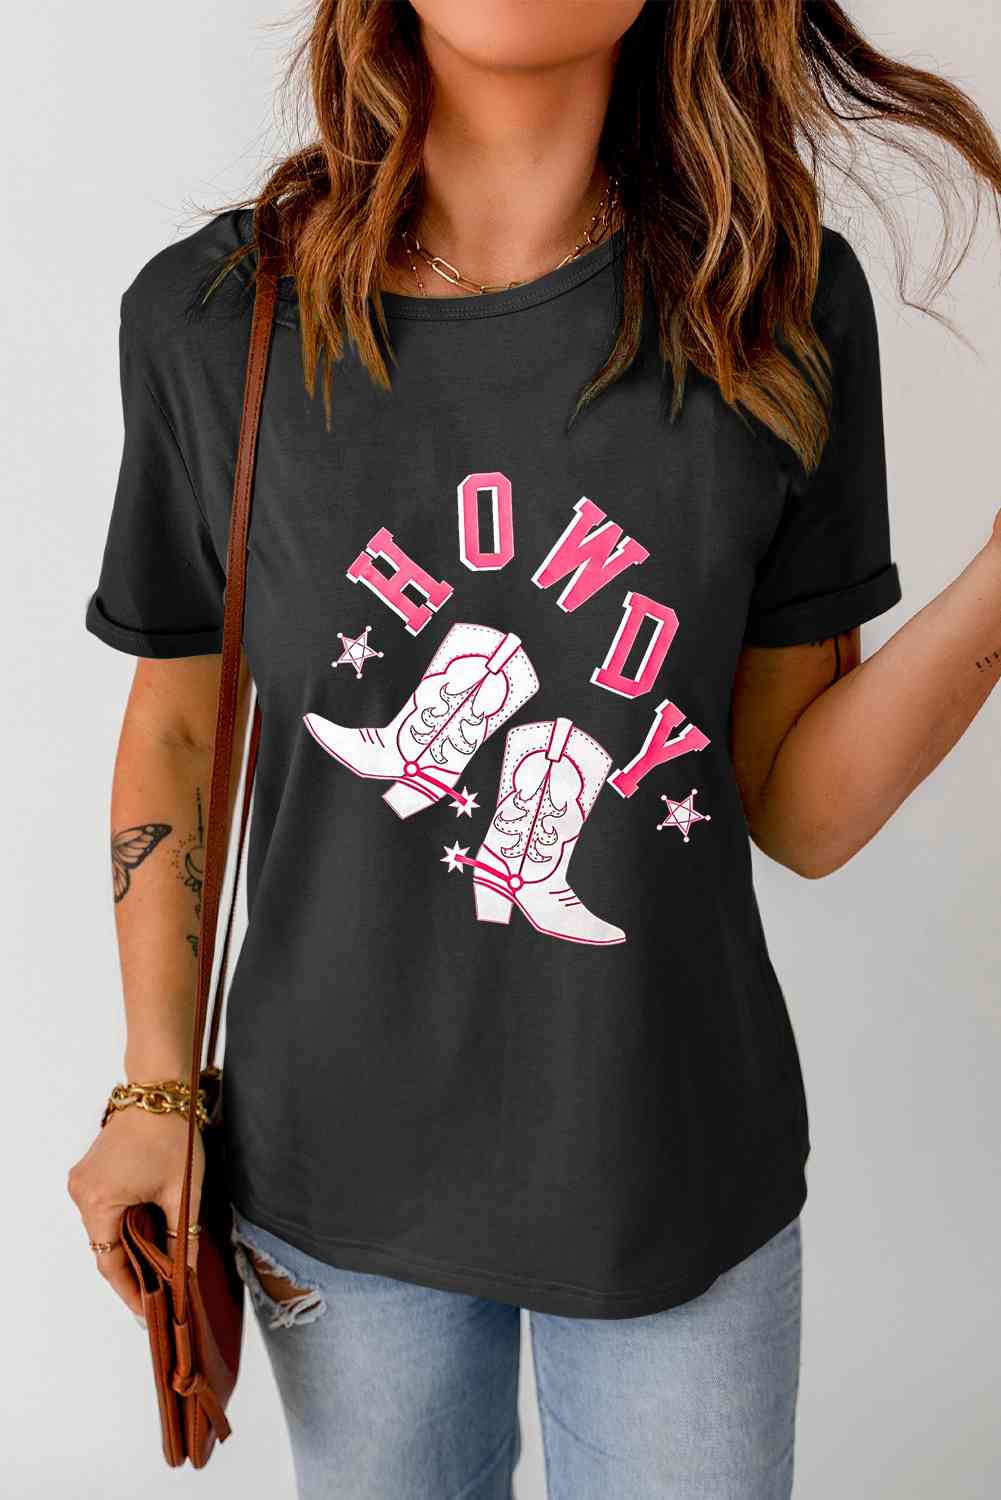 HOWDY Cowboy Boots Graphic Tee Shirts & Tops Krazy Heart Designs Boutique   